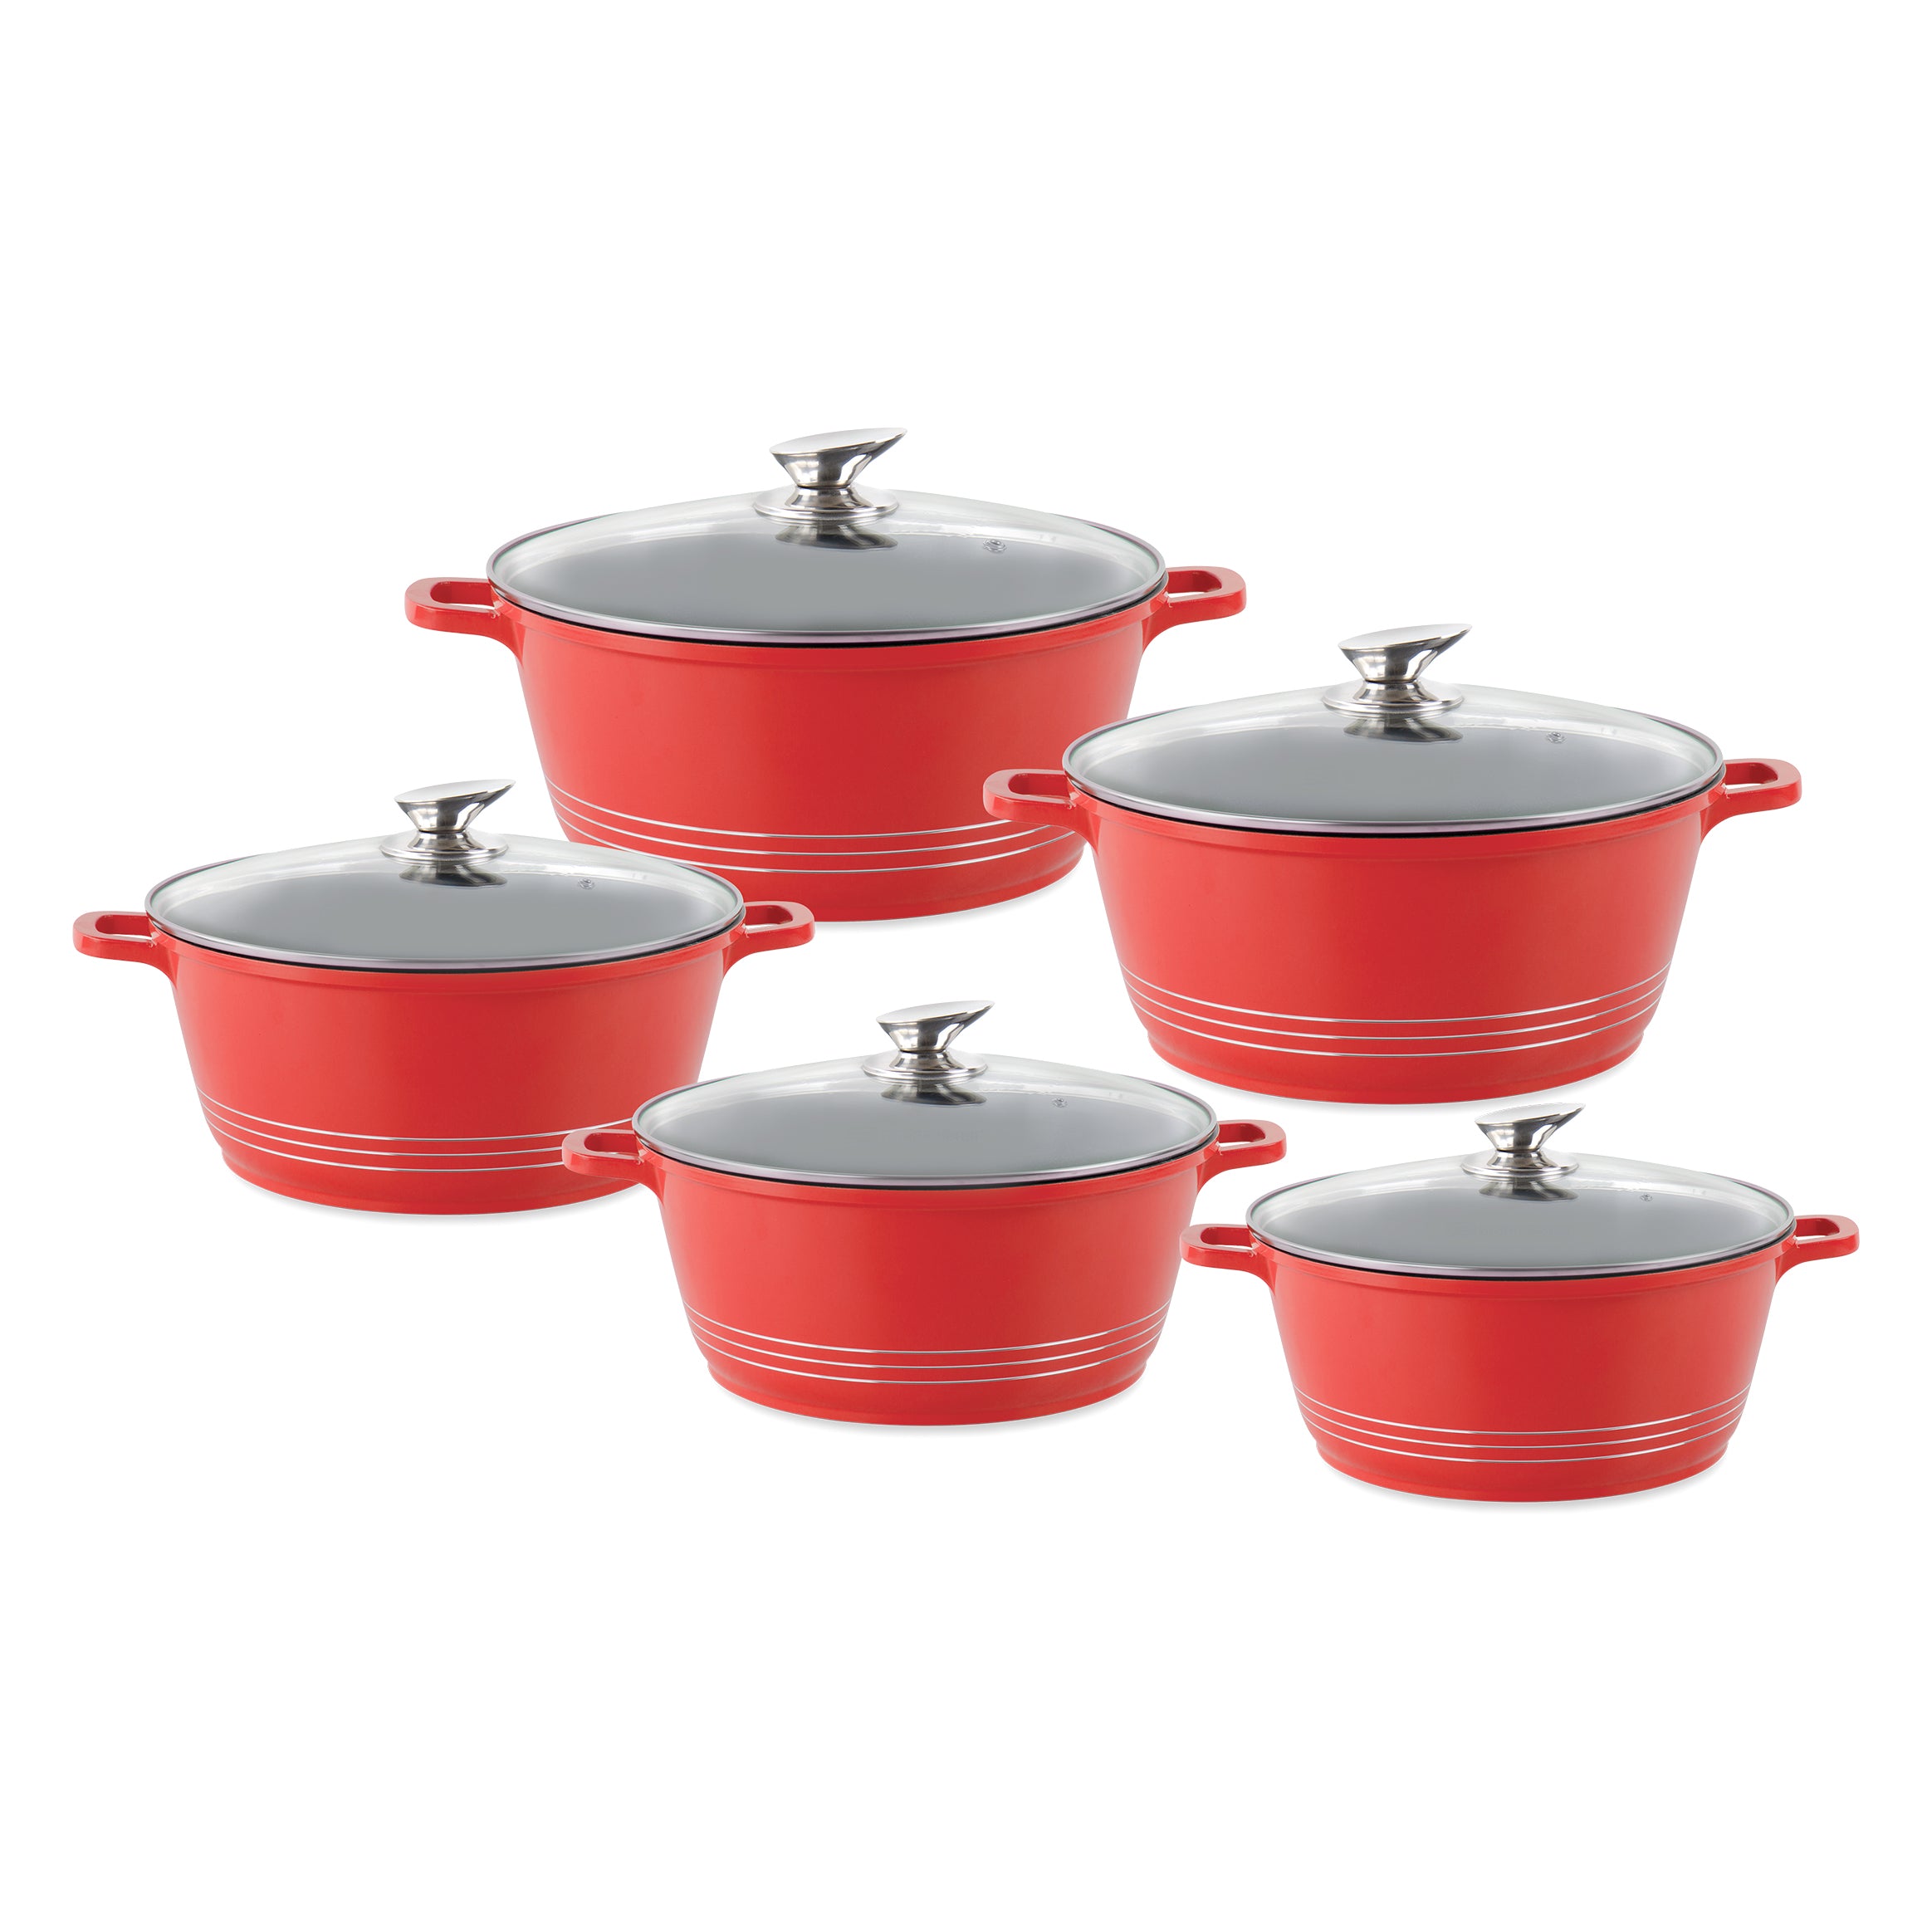 Die Cast Stockpots With Induction - DURANE - Red - 5 Pcs Set